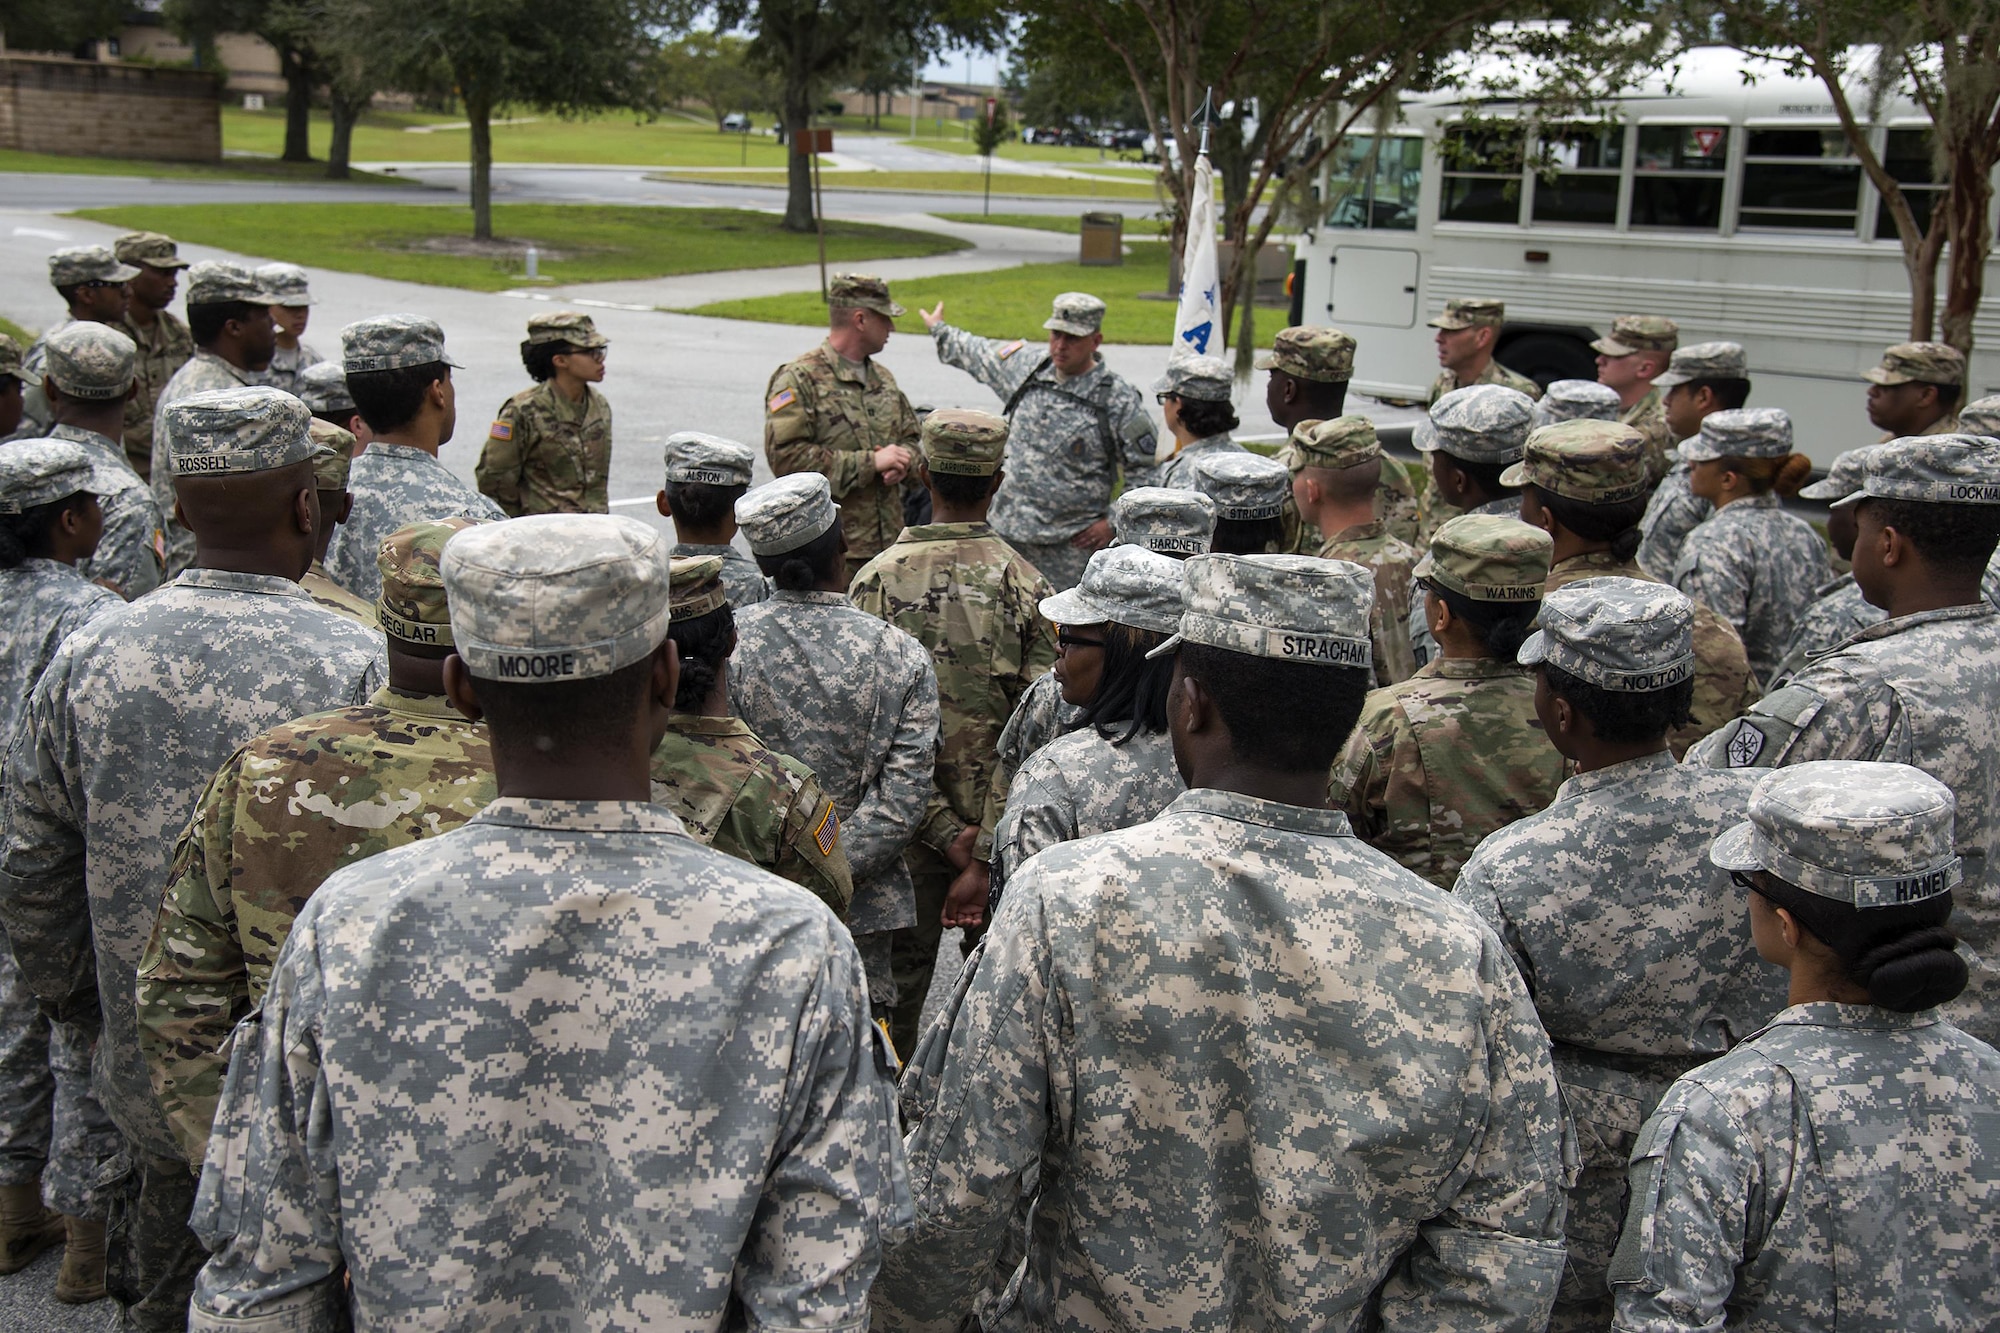 Army Staff Sgt. Timothy Gavitt, Georgia Army National Guard 348th Brigade Support Battalion section sergeant of transportation, briefs Soldiers, Sept. 13, 2017, at Moody Air Force Base, Ga. Units from the 48th Infantry Brigade Combat Team and Joint Task Force 781st Chemical, Radiological, Nuclear, Explosive Response Package stayed the night at Moody before heading to Orlando, Fla., to provide humanitarian relief for the victims of Hurricane Irma. (U.S. Air Force photo by Airman 1st Class Erick Requadt)